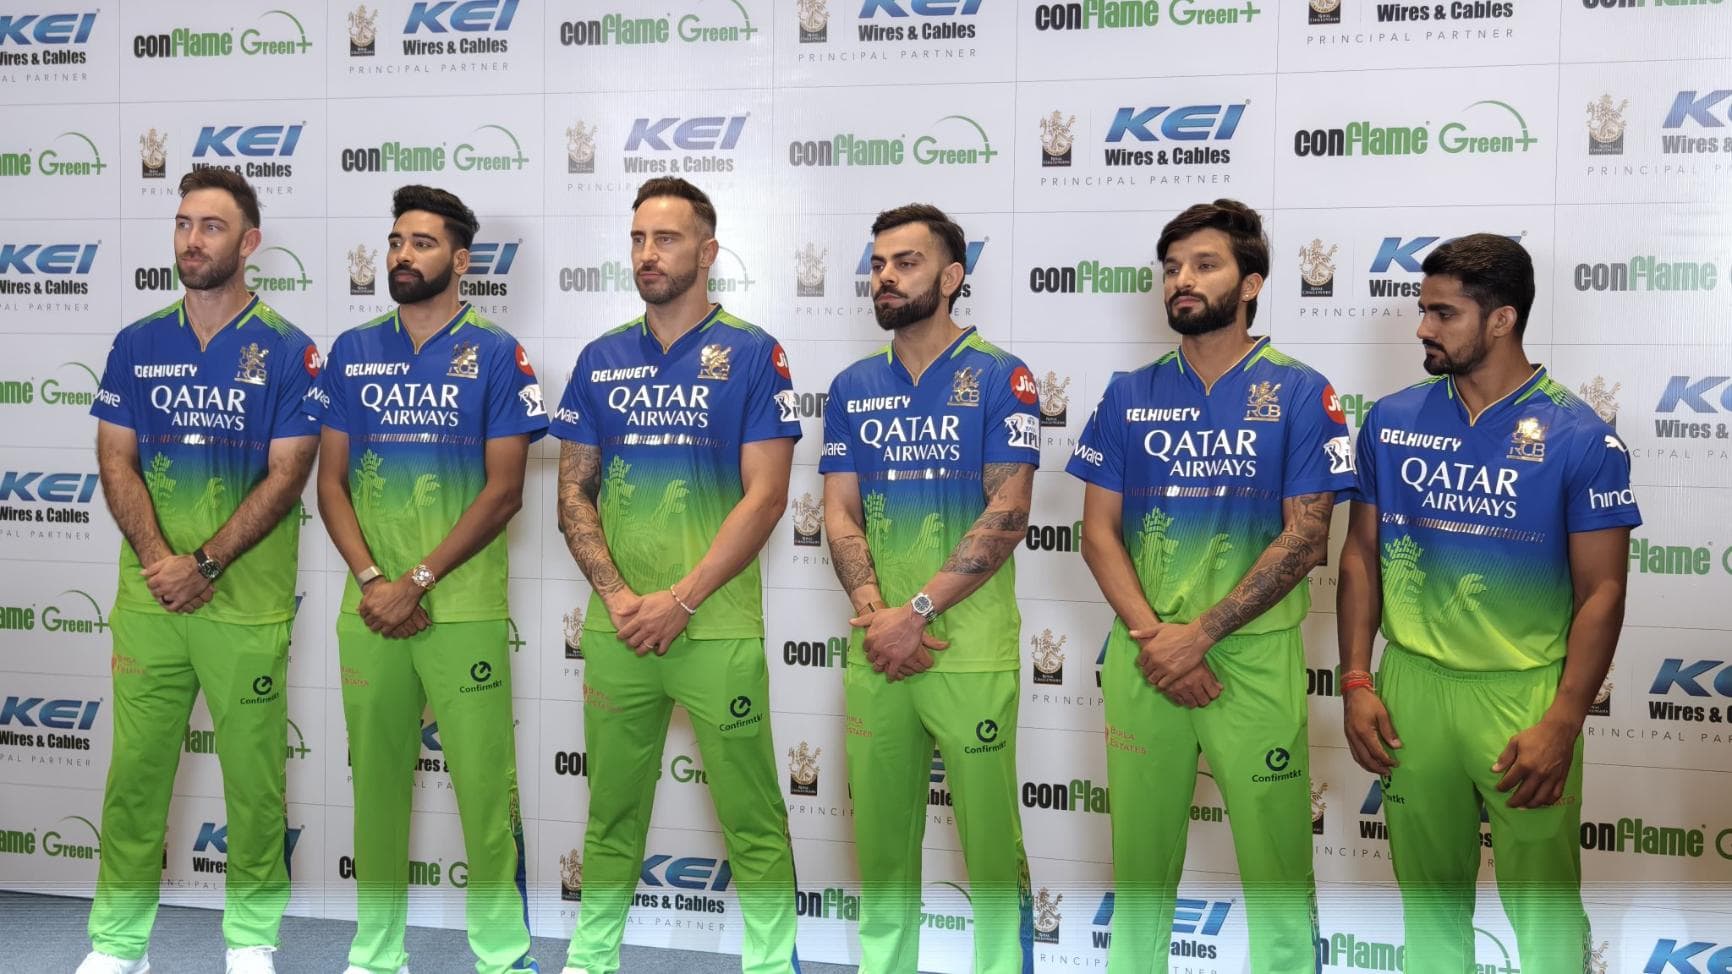 RCB in Green Jersey [X]
